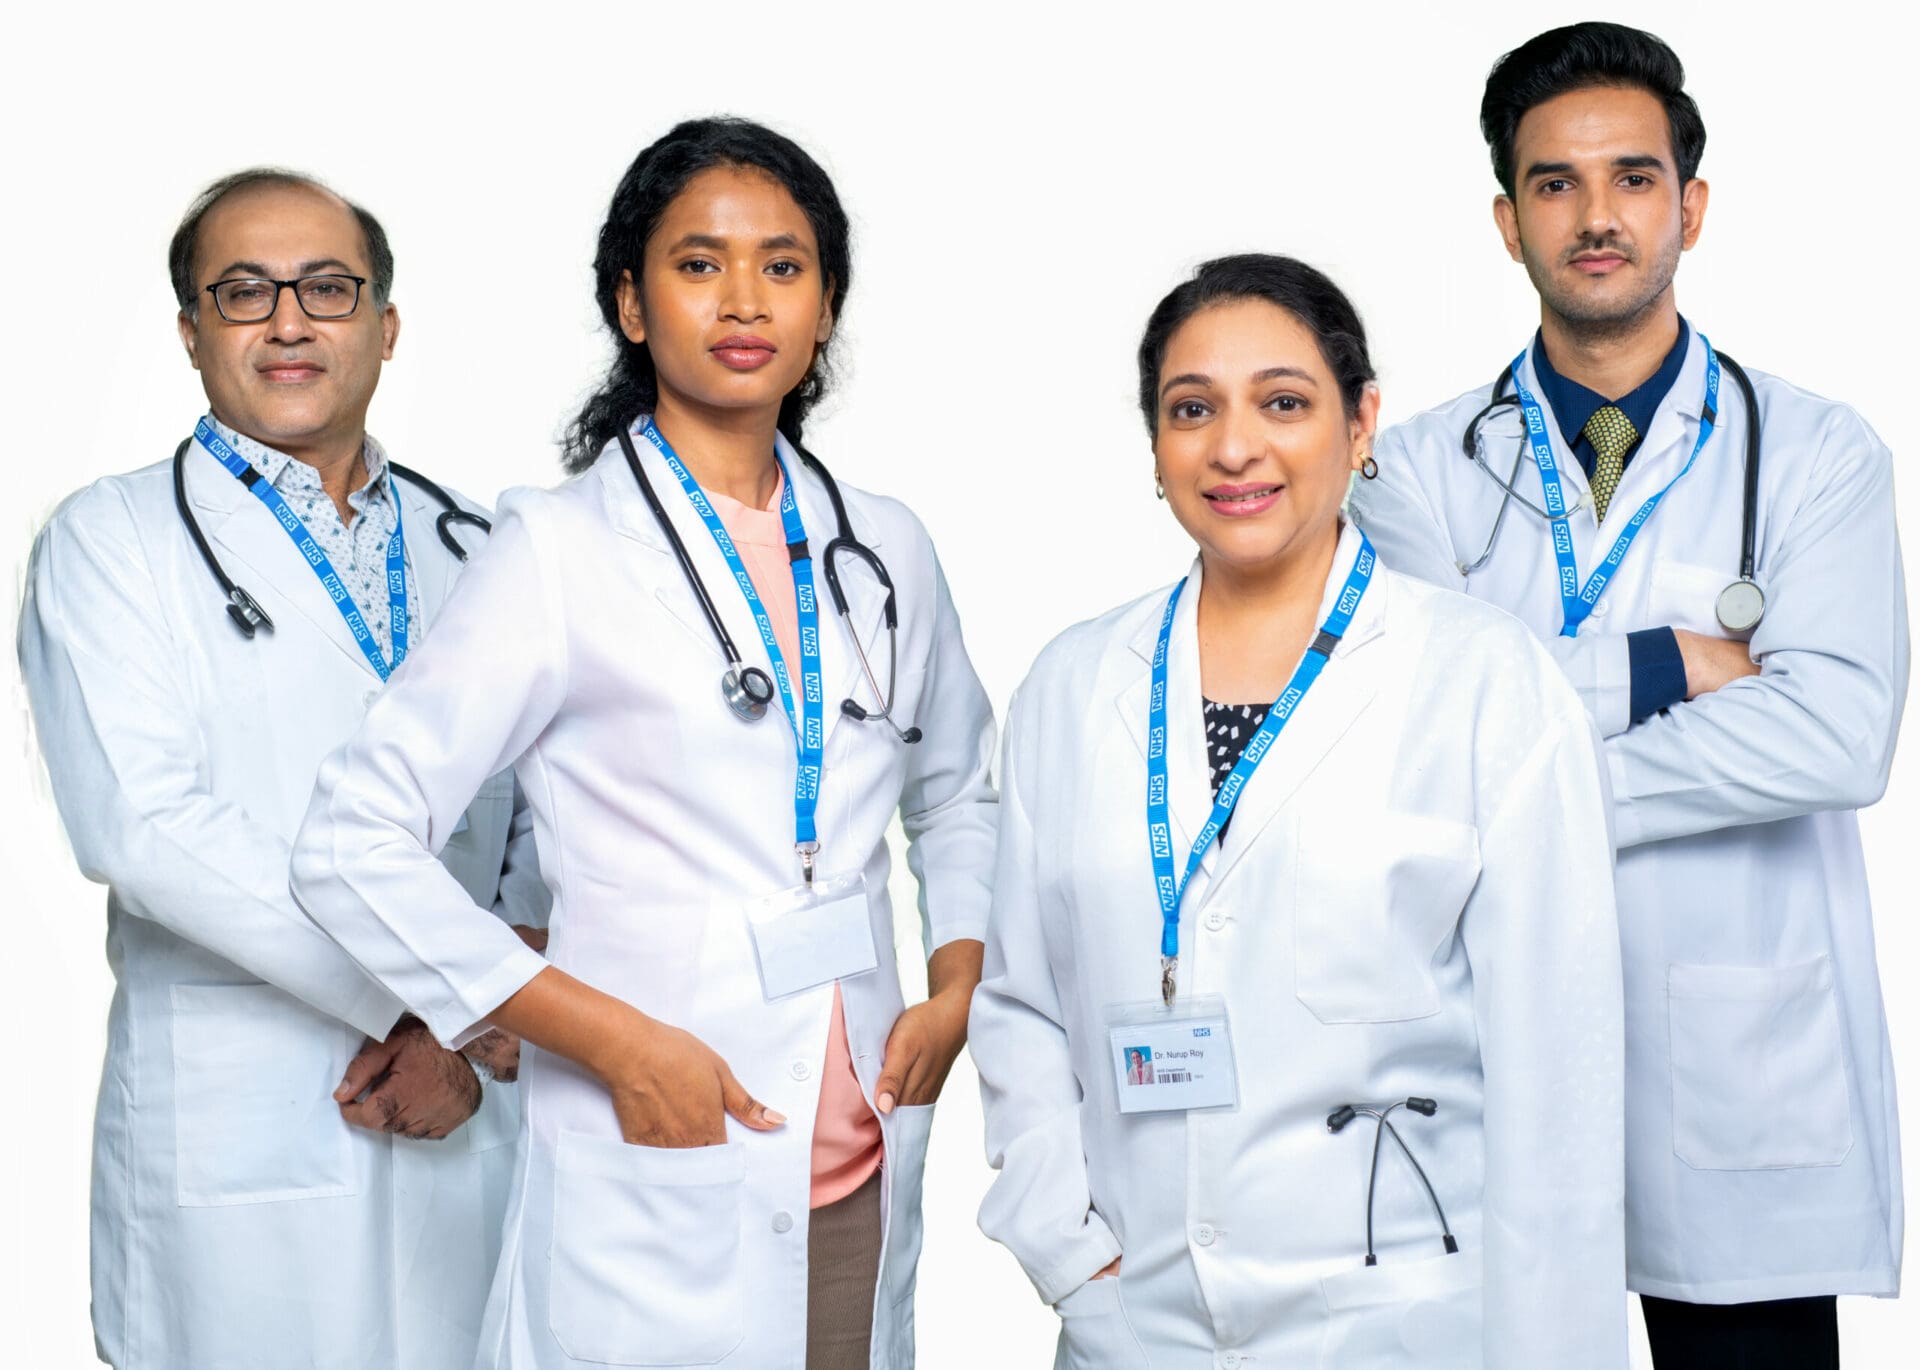 Indian International Doctors recruited by Remedium Partners into the NHS UK